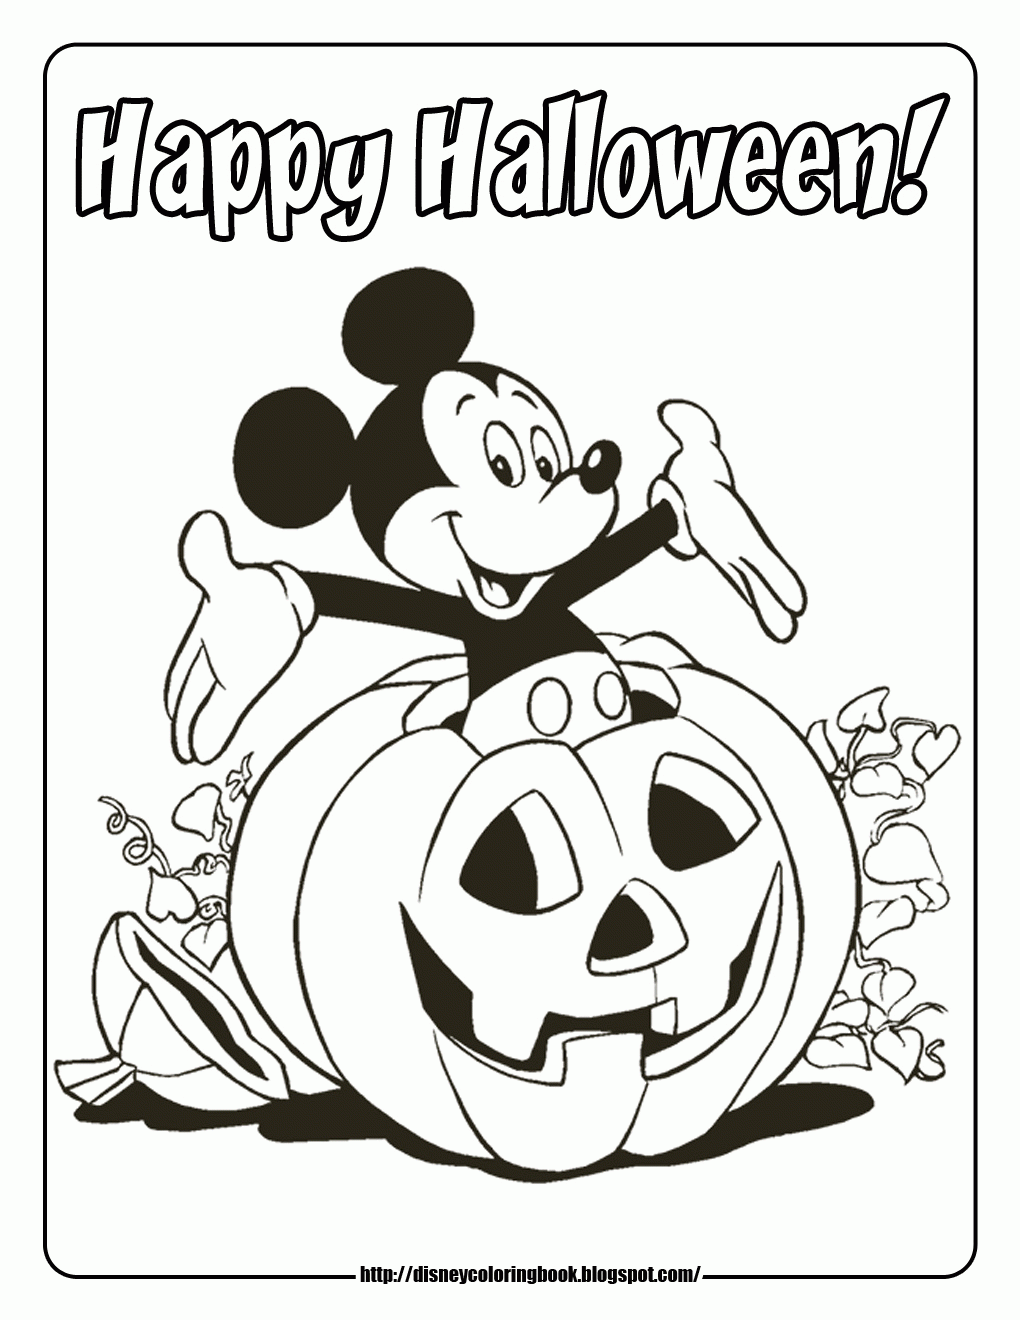 Amazing of Simple Pumpkin Coloring Page By Halloween Colo #67